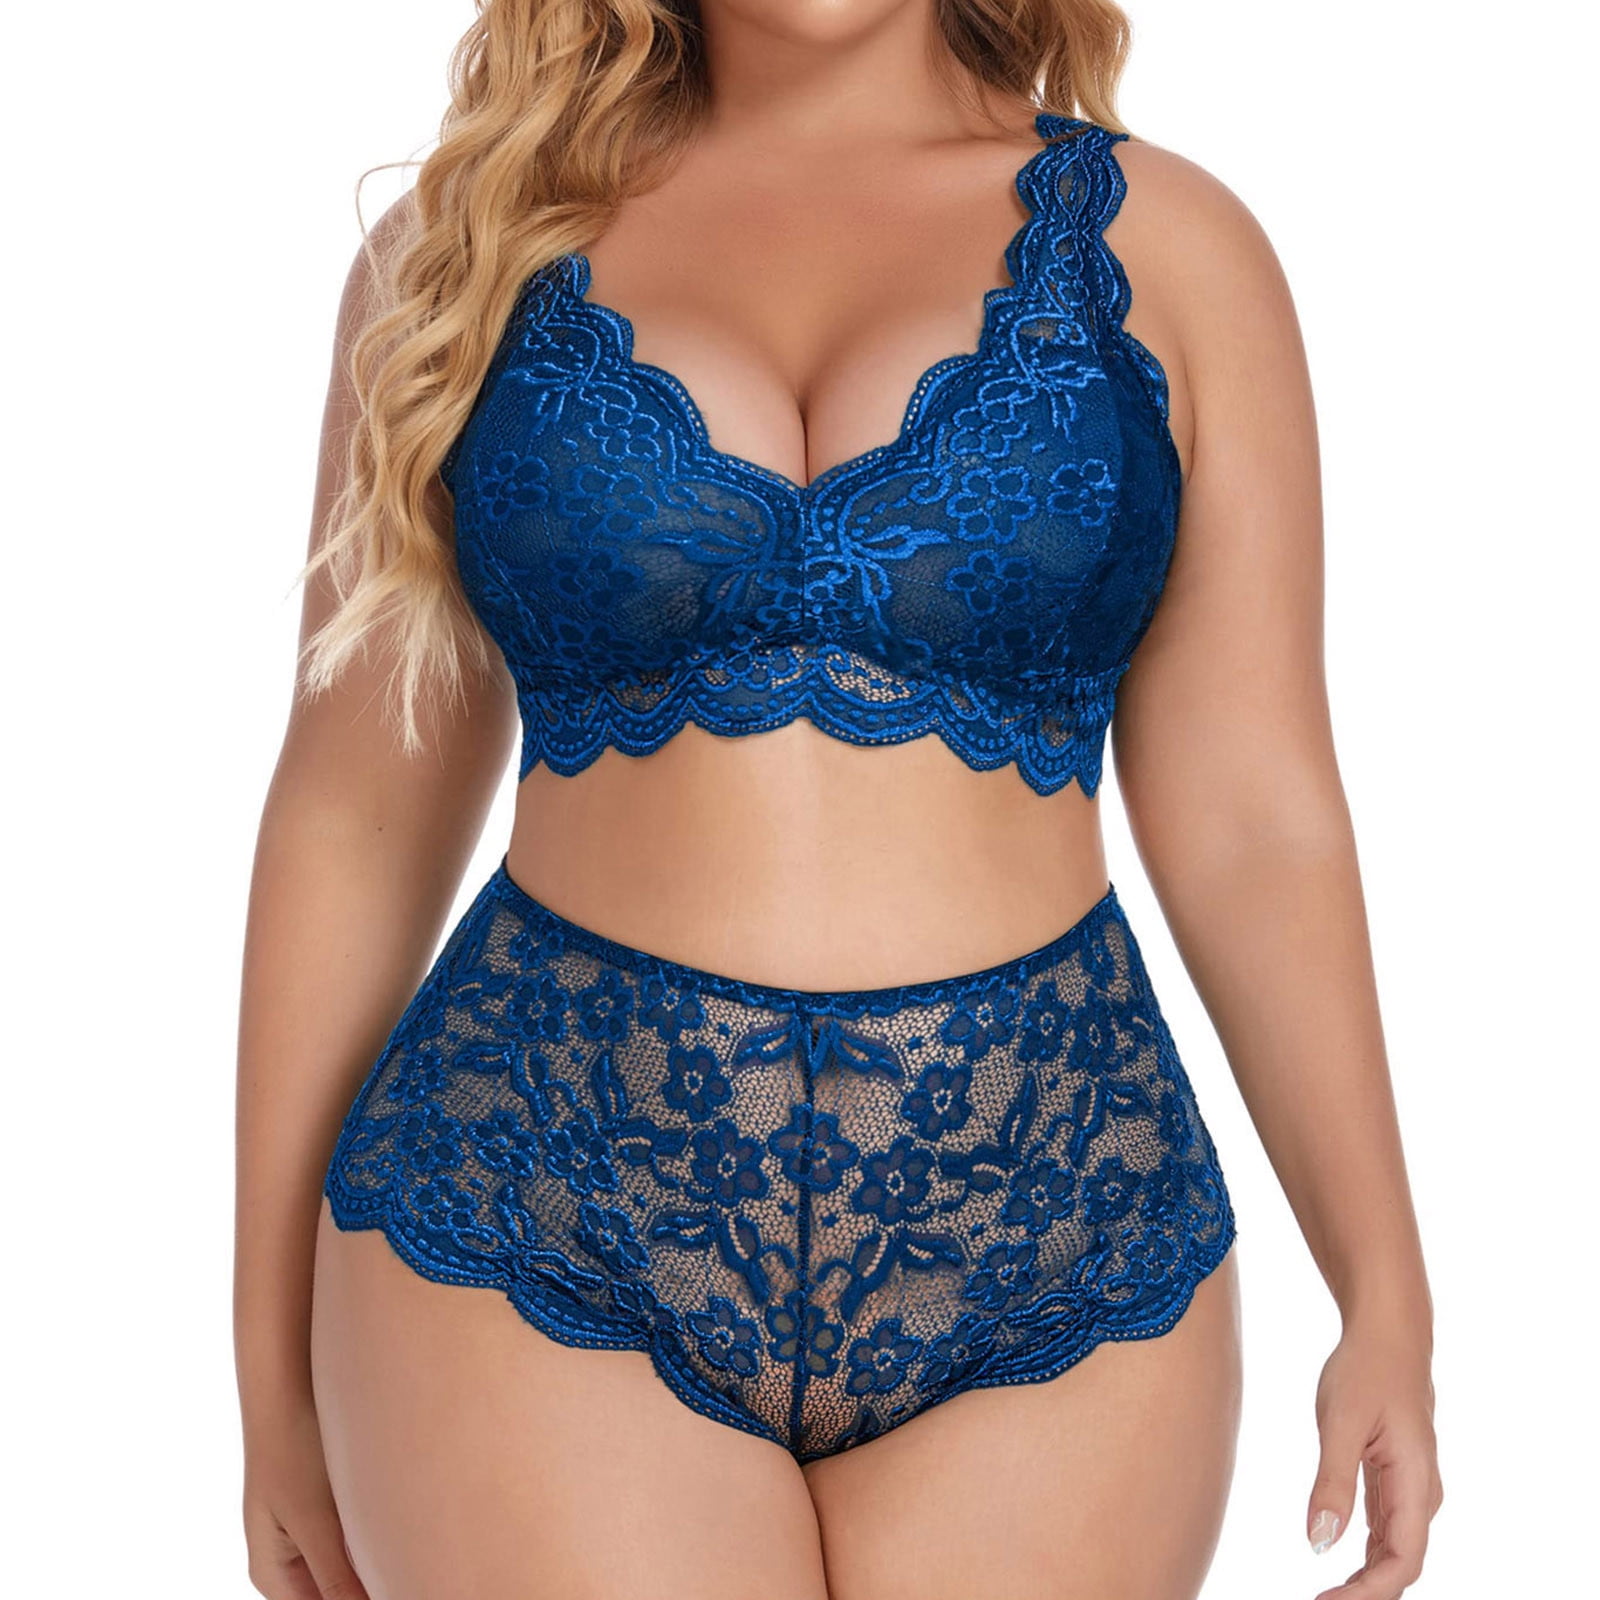 Vedolay Bra And Panty Set Plus Size 2 Piece Lingerie for Women